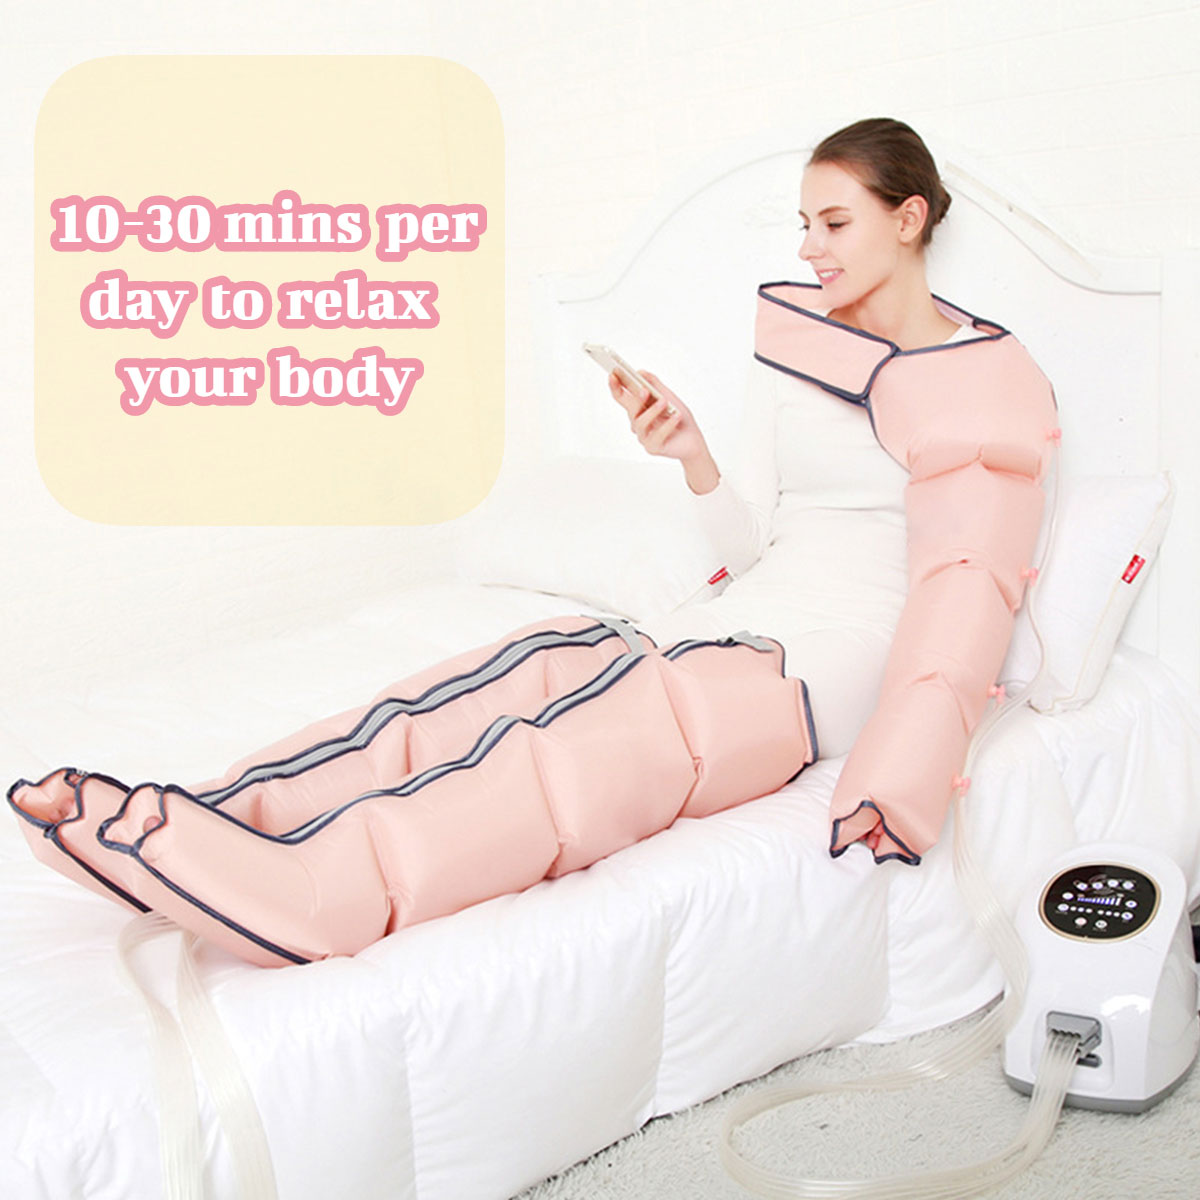 Electric-Air-Pressure-Leg-Waist-Arm-Massager-Kneading-Extrusion-Therapy-Massager-3-Modes-Time-Settin-1740687-5